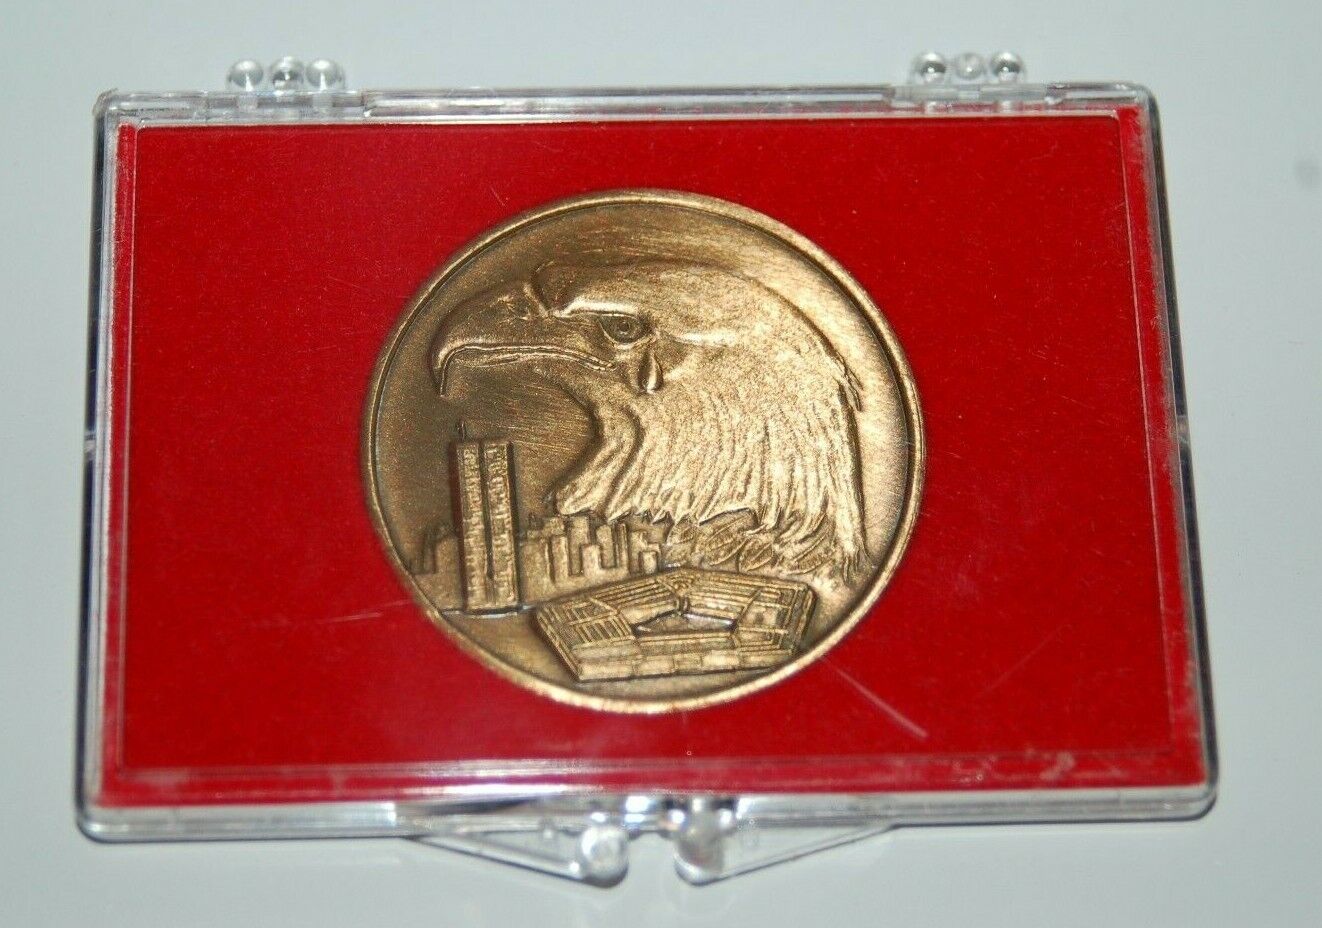 Memorial Crying Eagle Gold Token - Dedicated to the Victims of Sept. 11, 2001